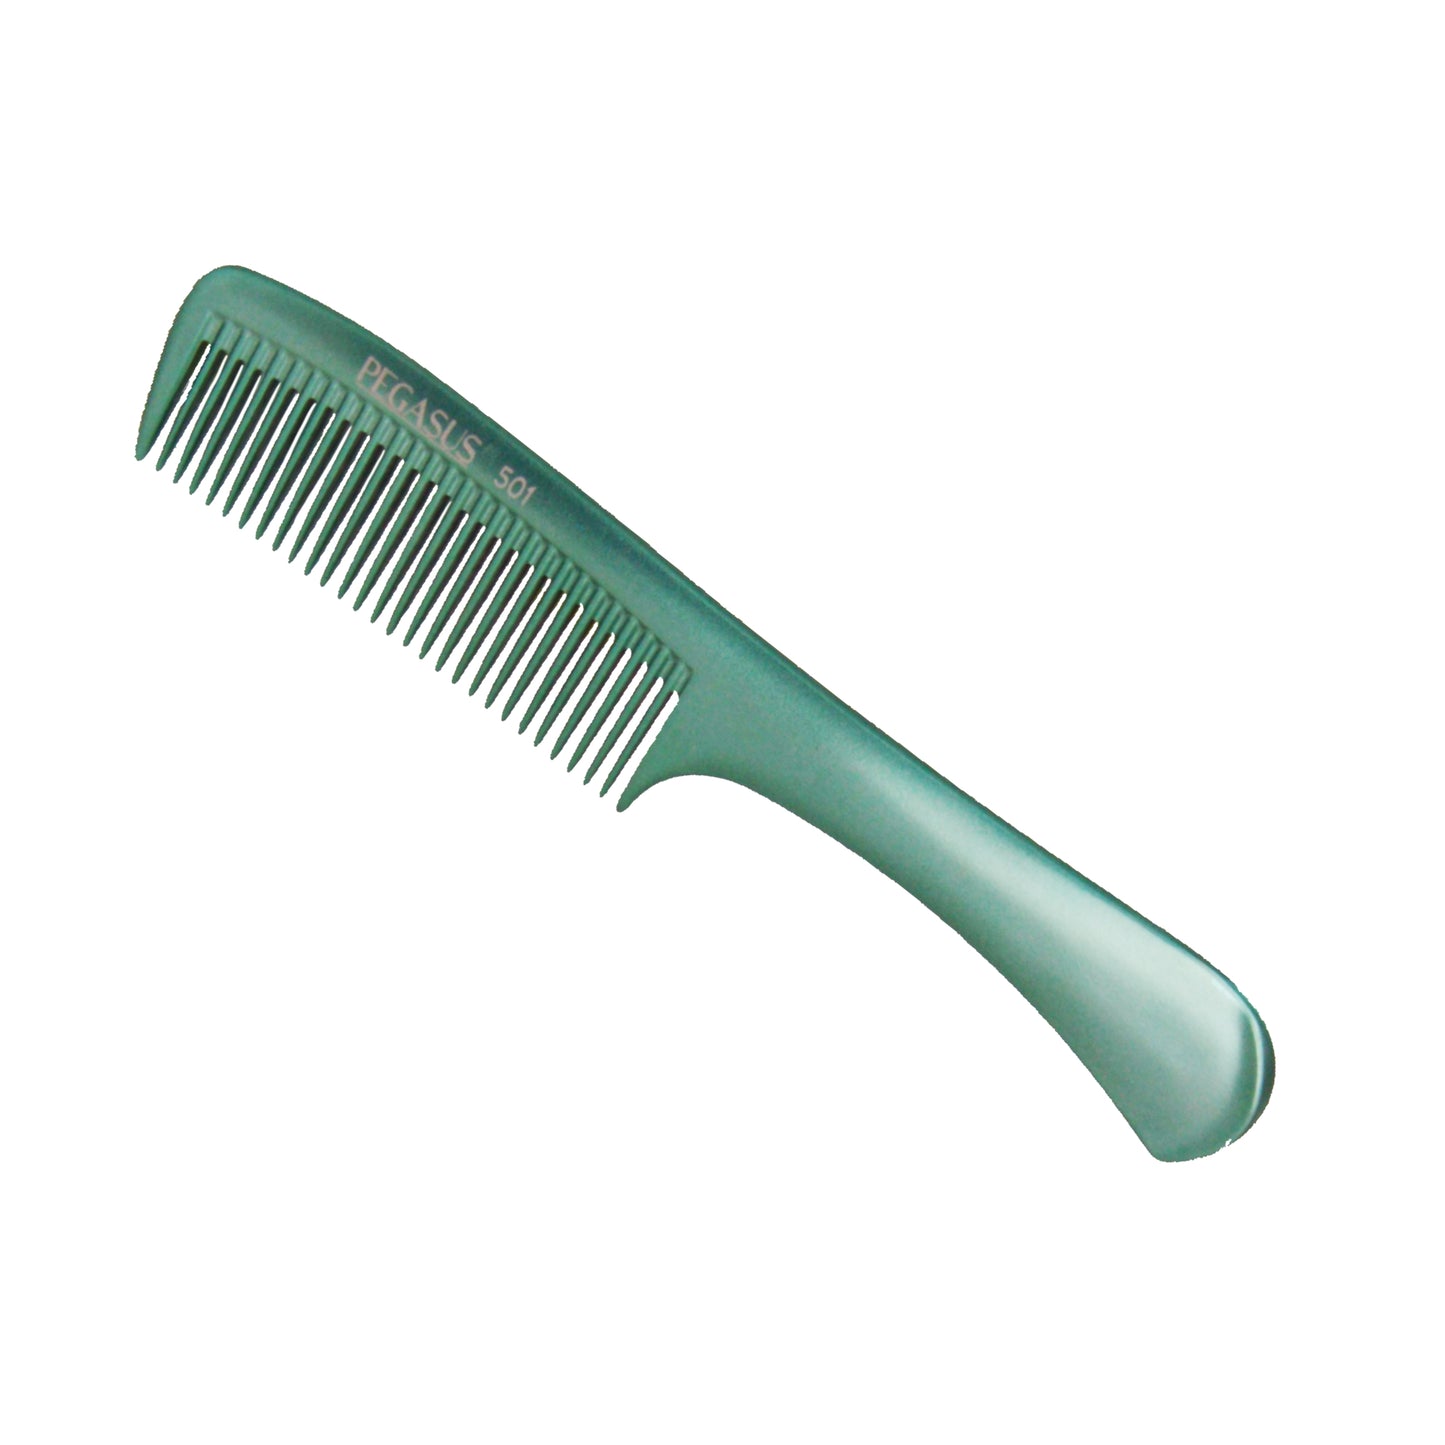 Pegasus MICOLOR 501, 9in Hard Rubber Handle Comb, Handmade, Seamless, Smooth Edges, Anti Static, Heat and Chemically Resistant, Wet Hair, Everyday Grooming Comb | Peines de goma dura - Green